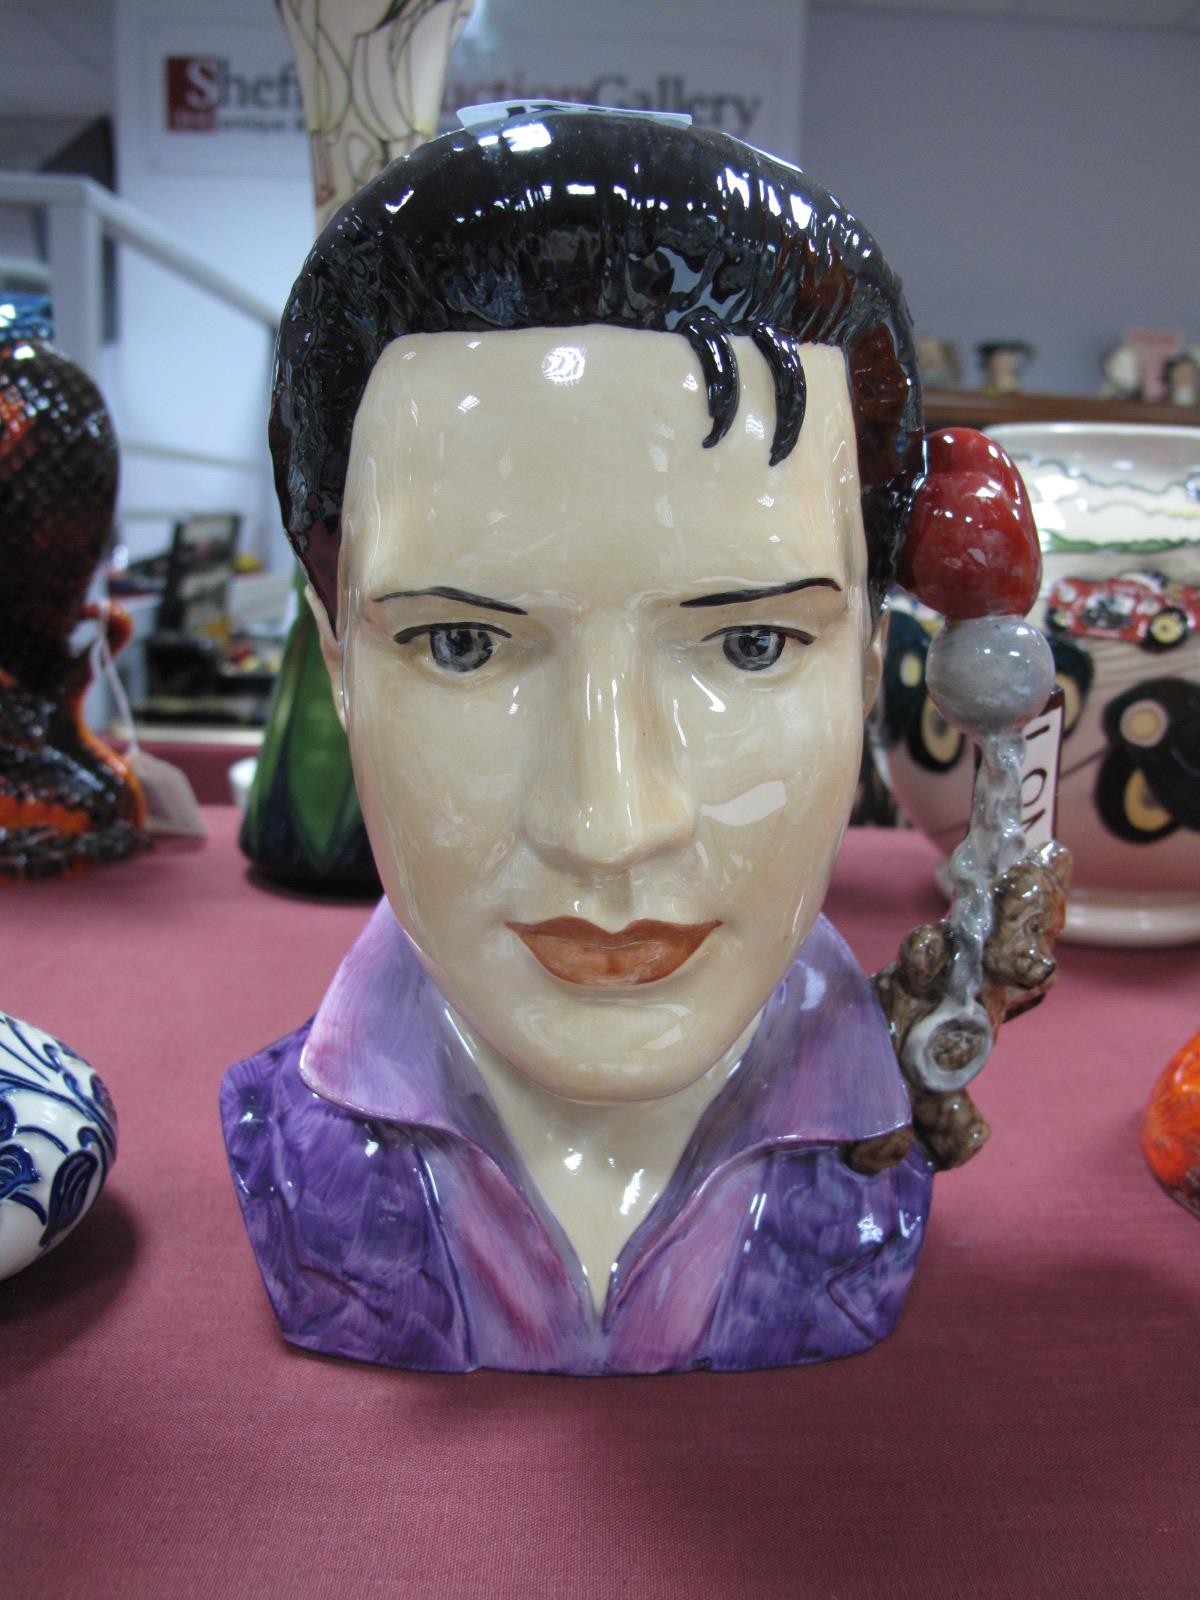 A Peggy Davis Elvis "The King of Rock" Character Jug by Michael Jackson, limited edition 1/1 in this